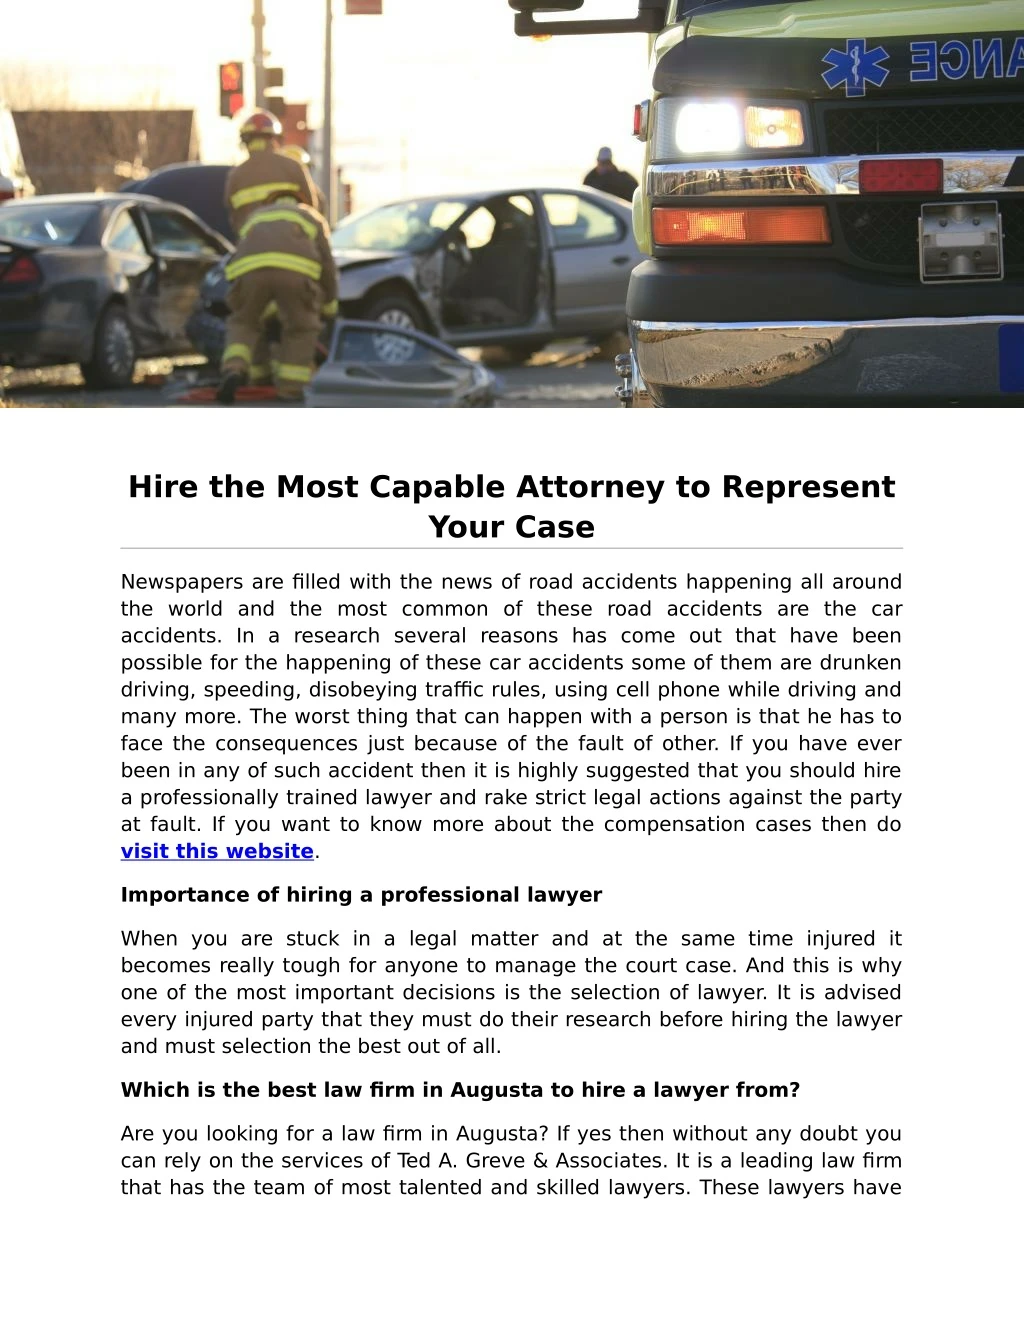 hire the most capable attorney to represent your